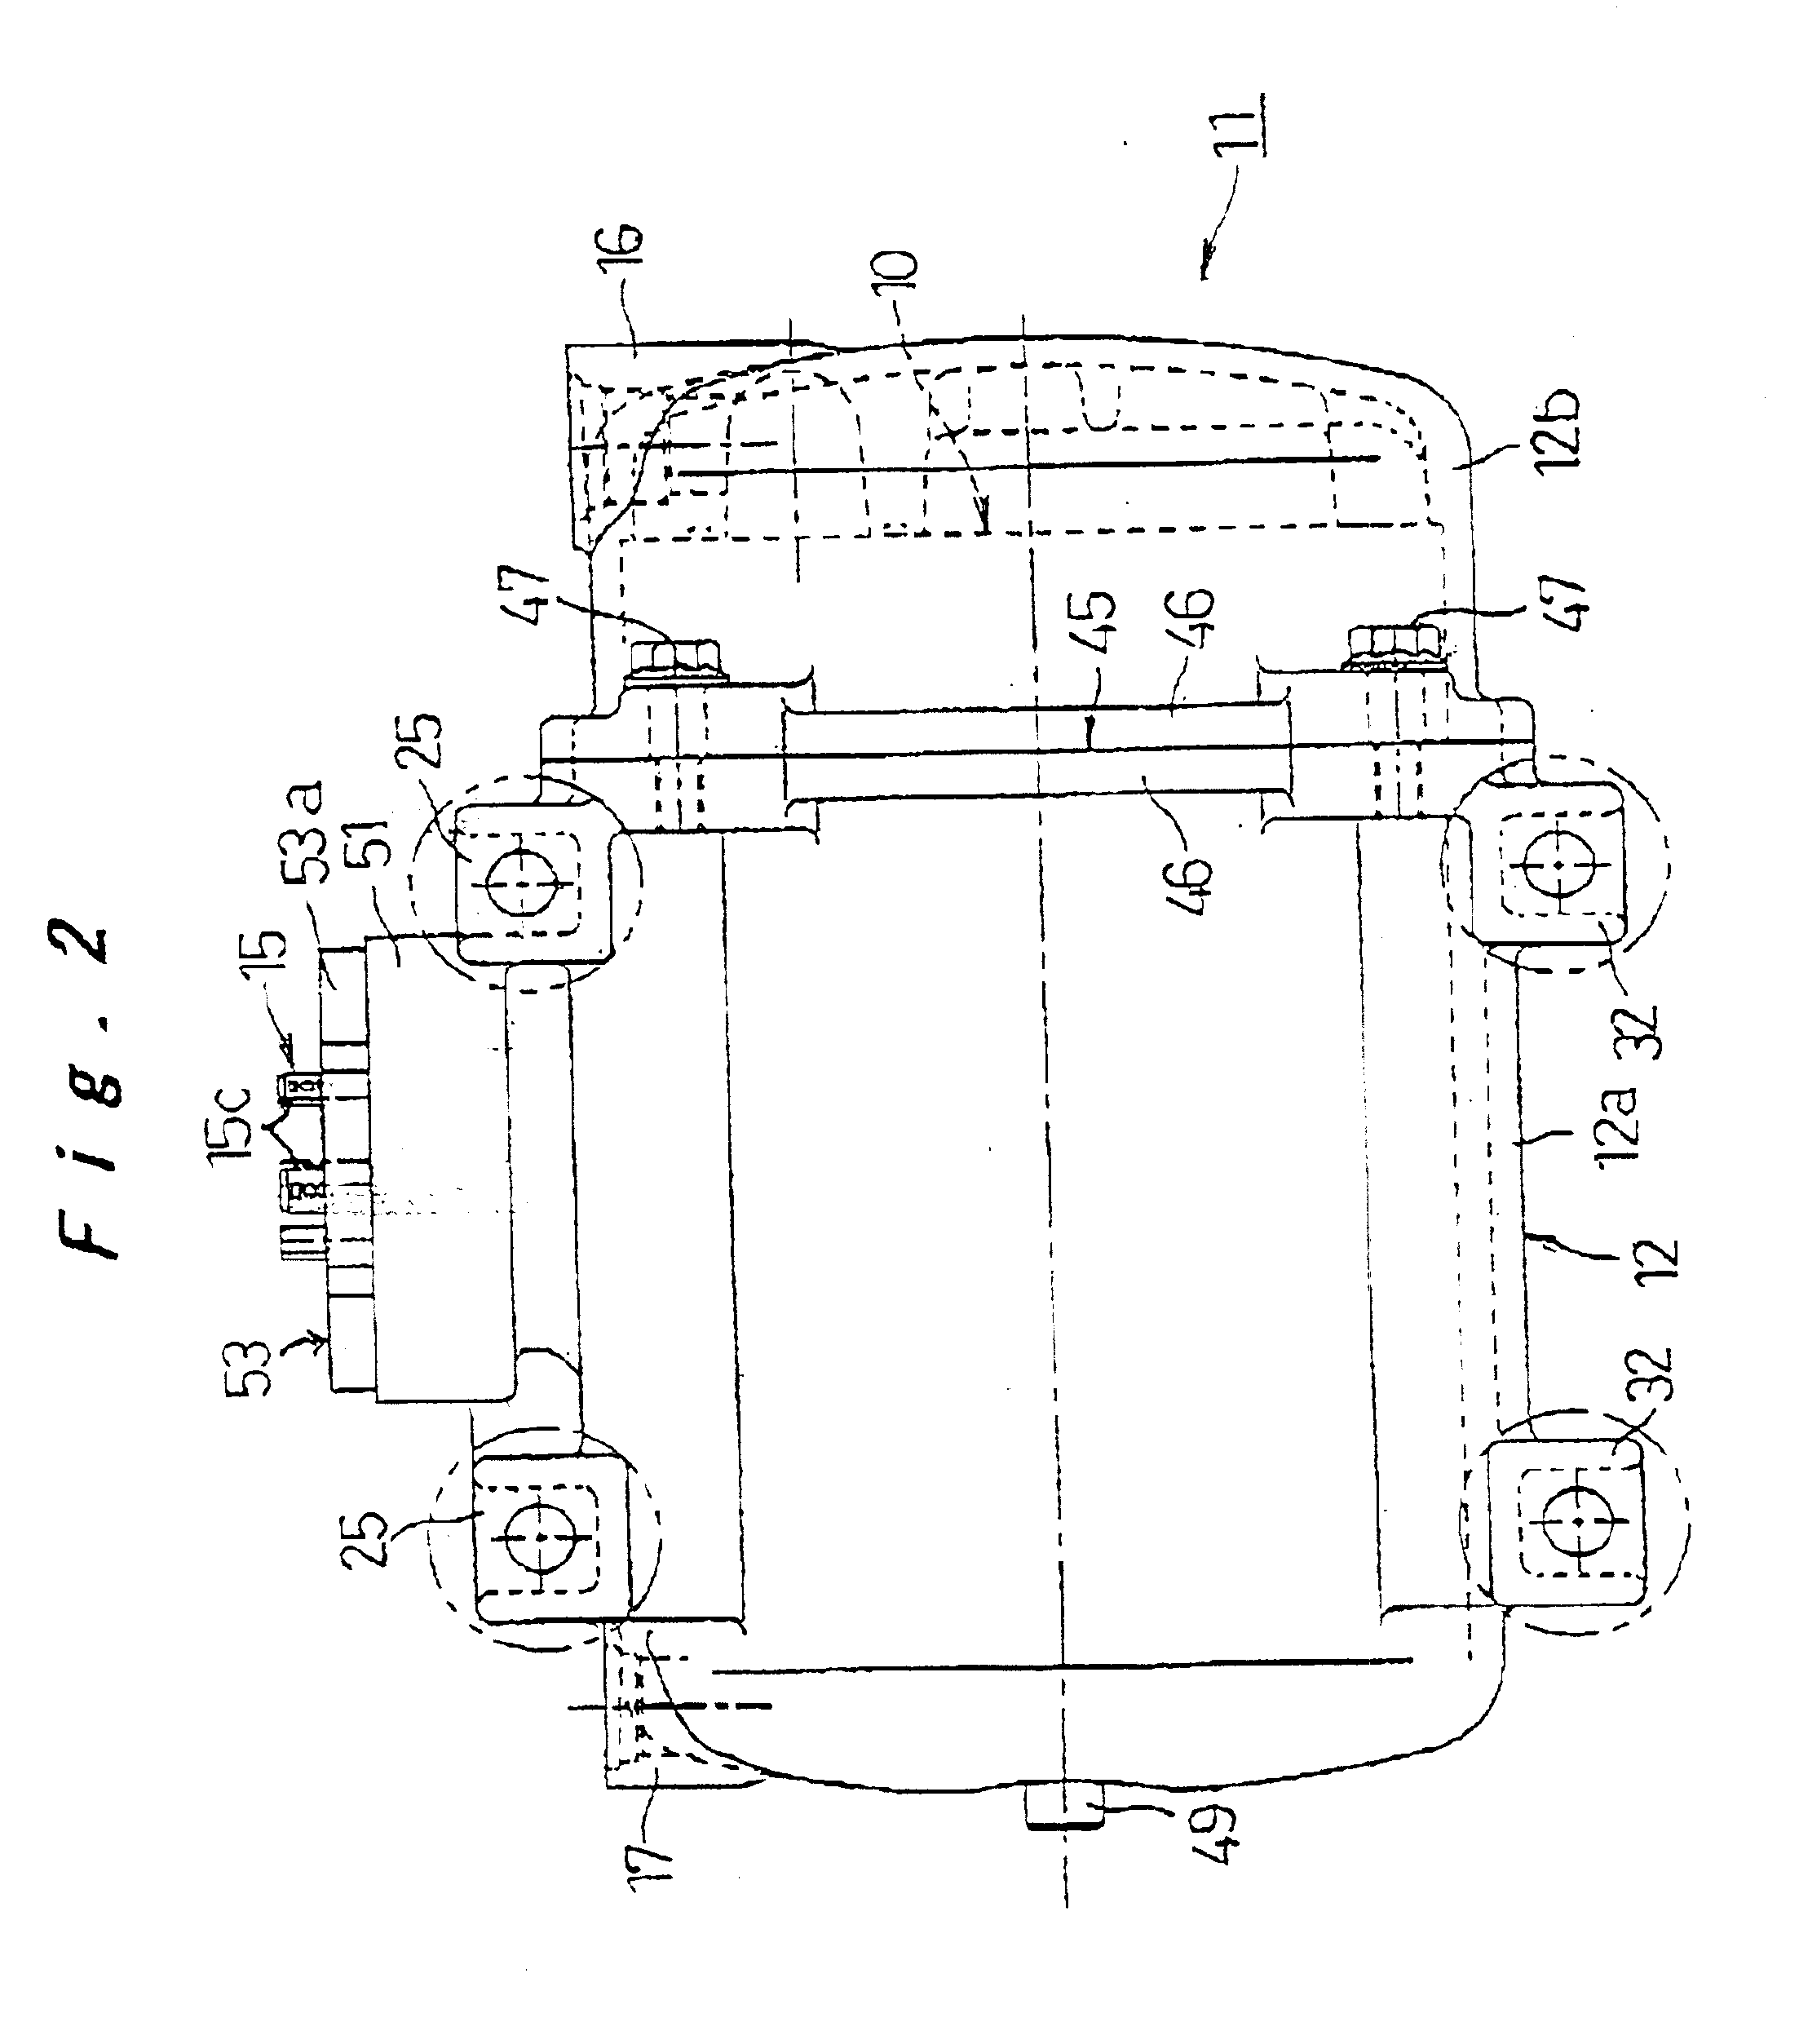 Compressor with built-in motor and mobile structure using the same